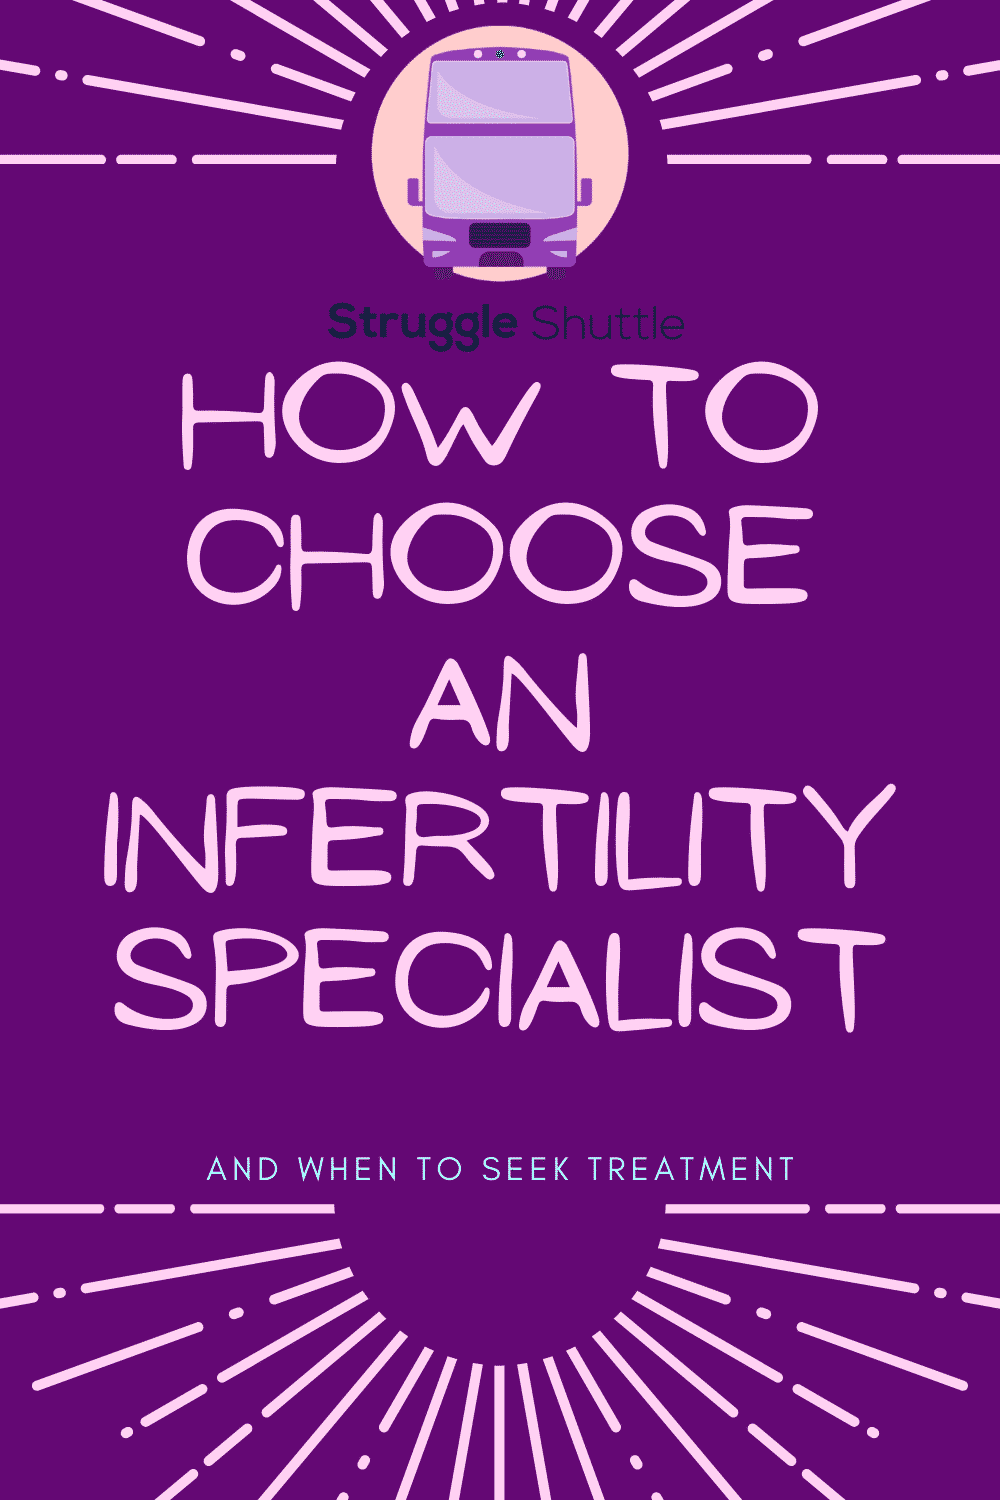 how to choose and infertility specialist